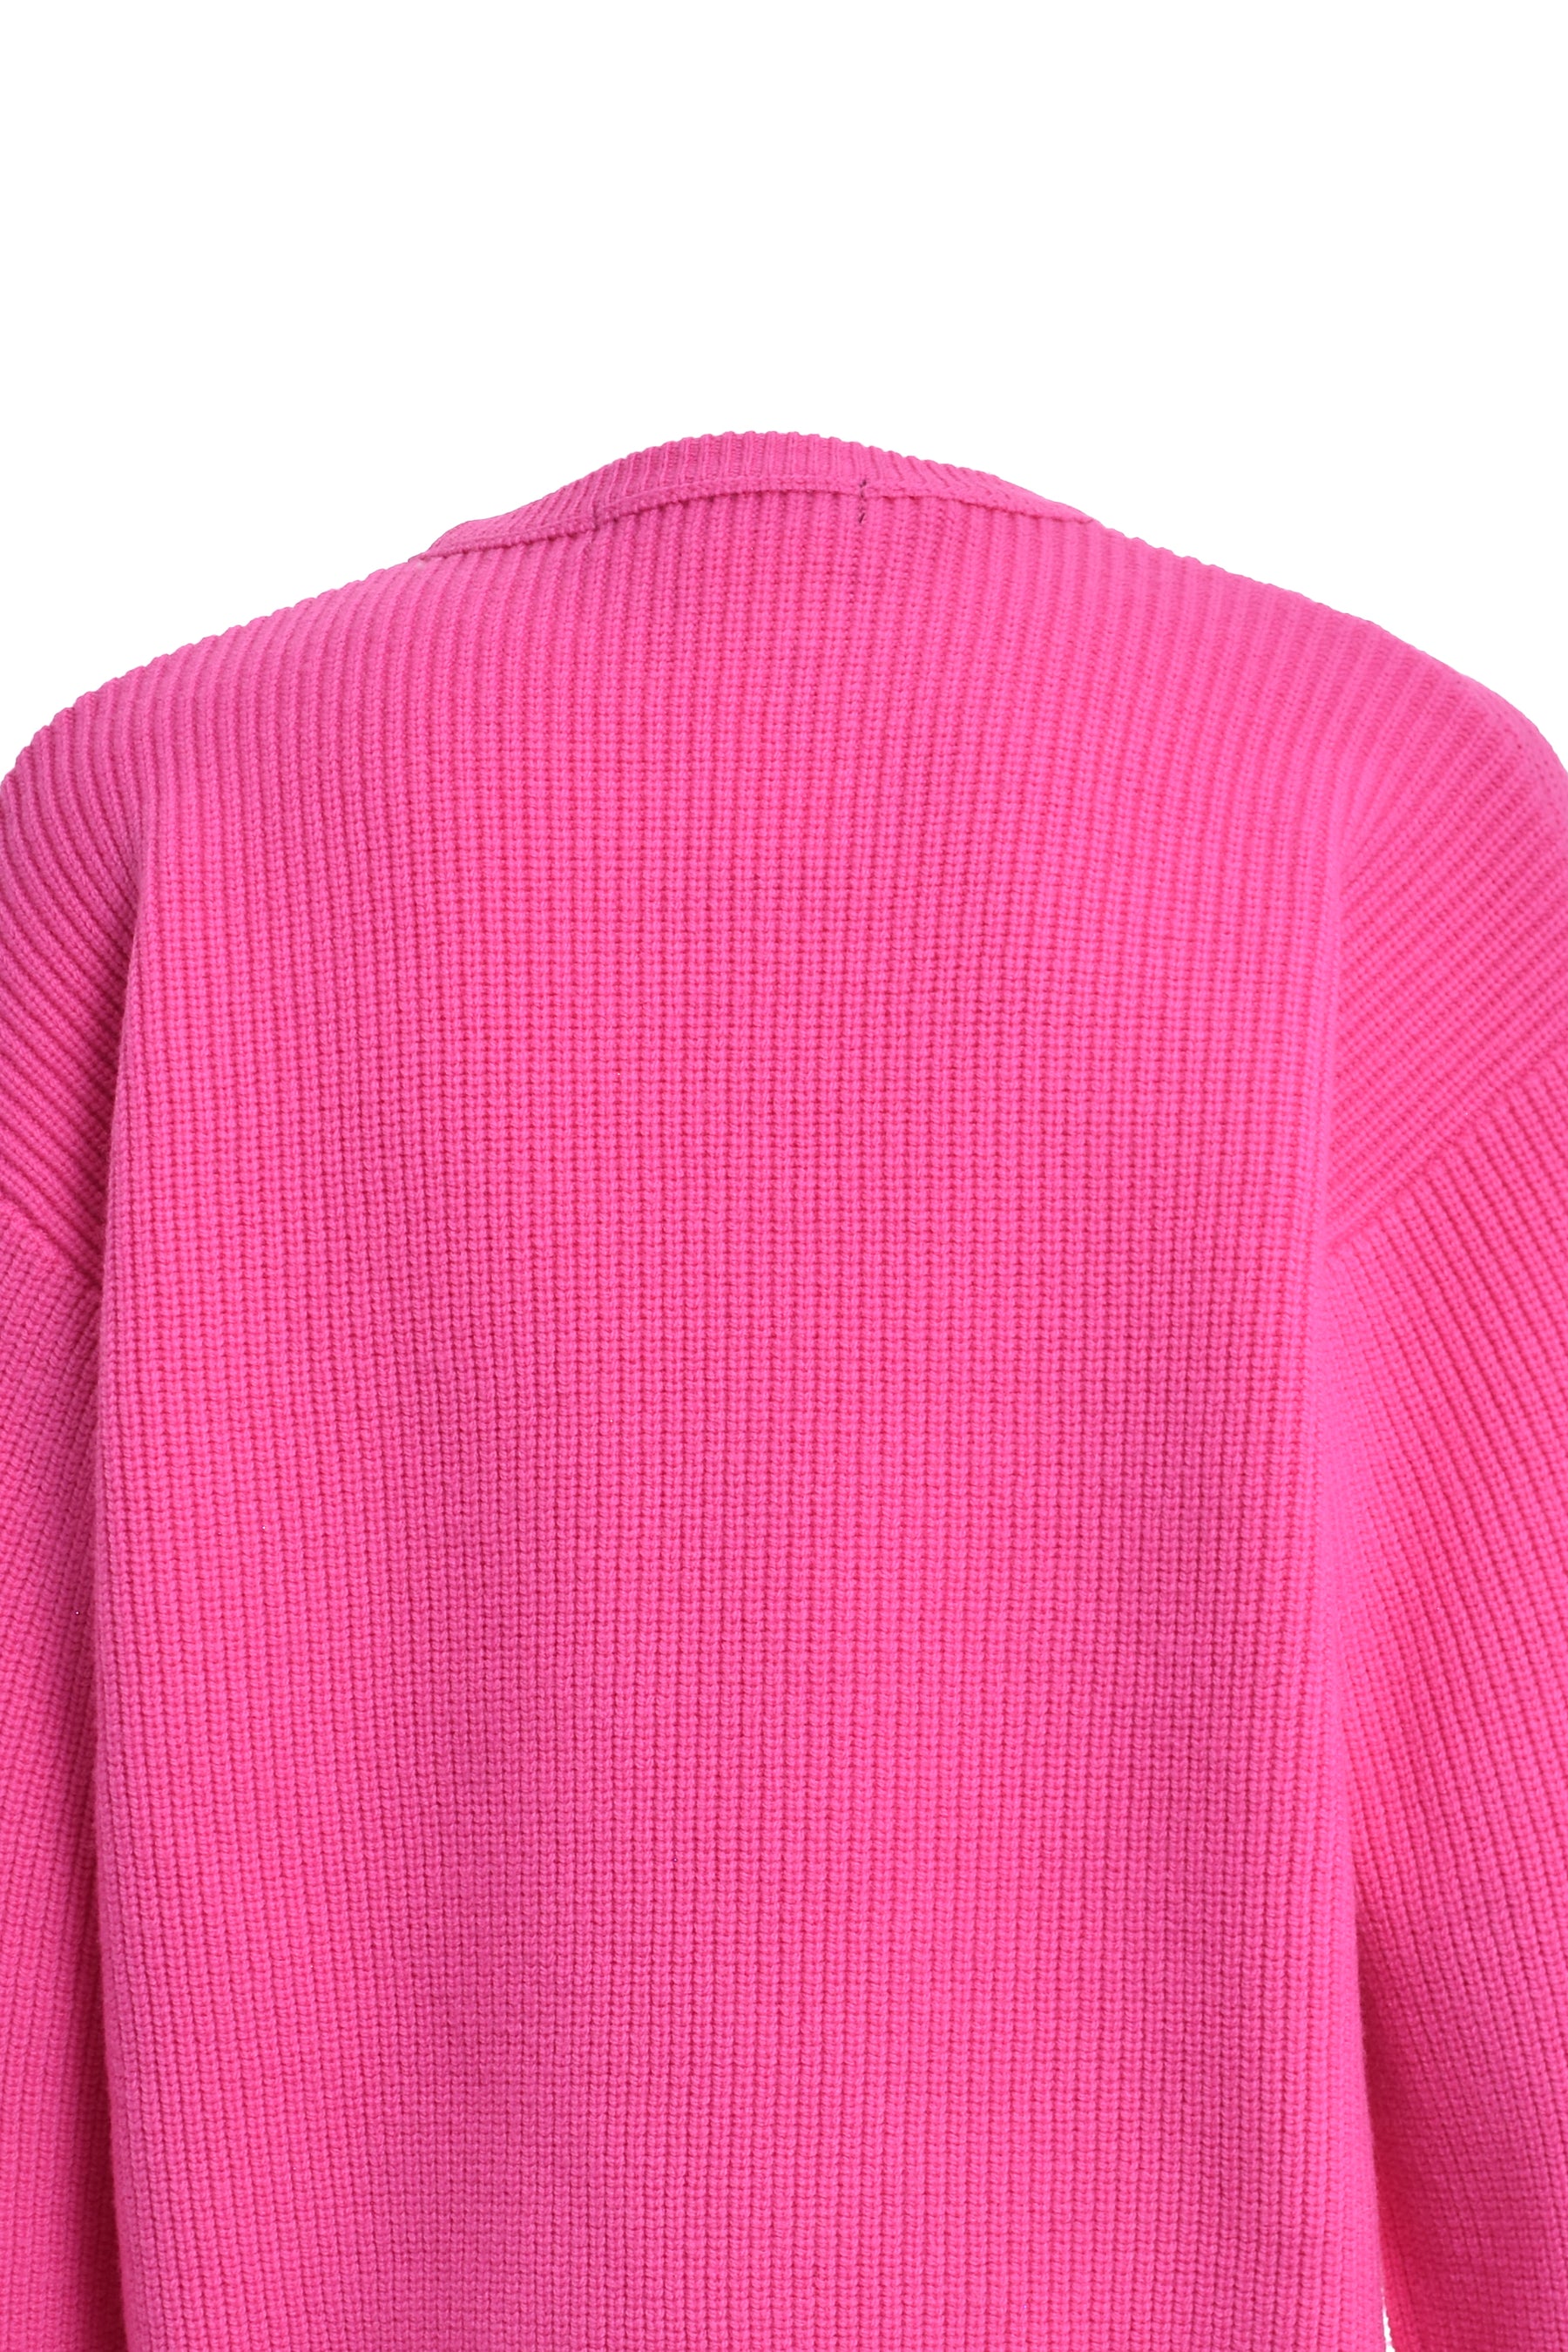 ROUTE KNIT SWEATER / PNK